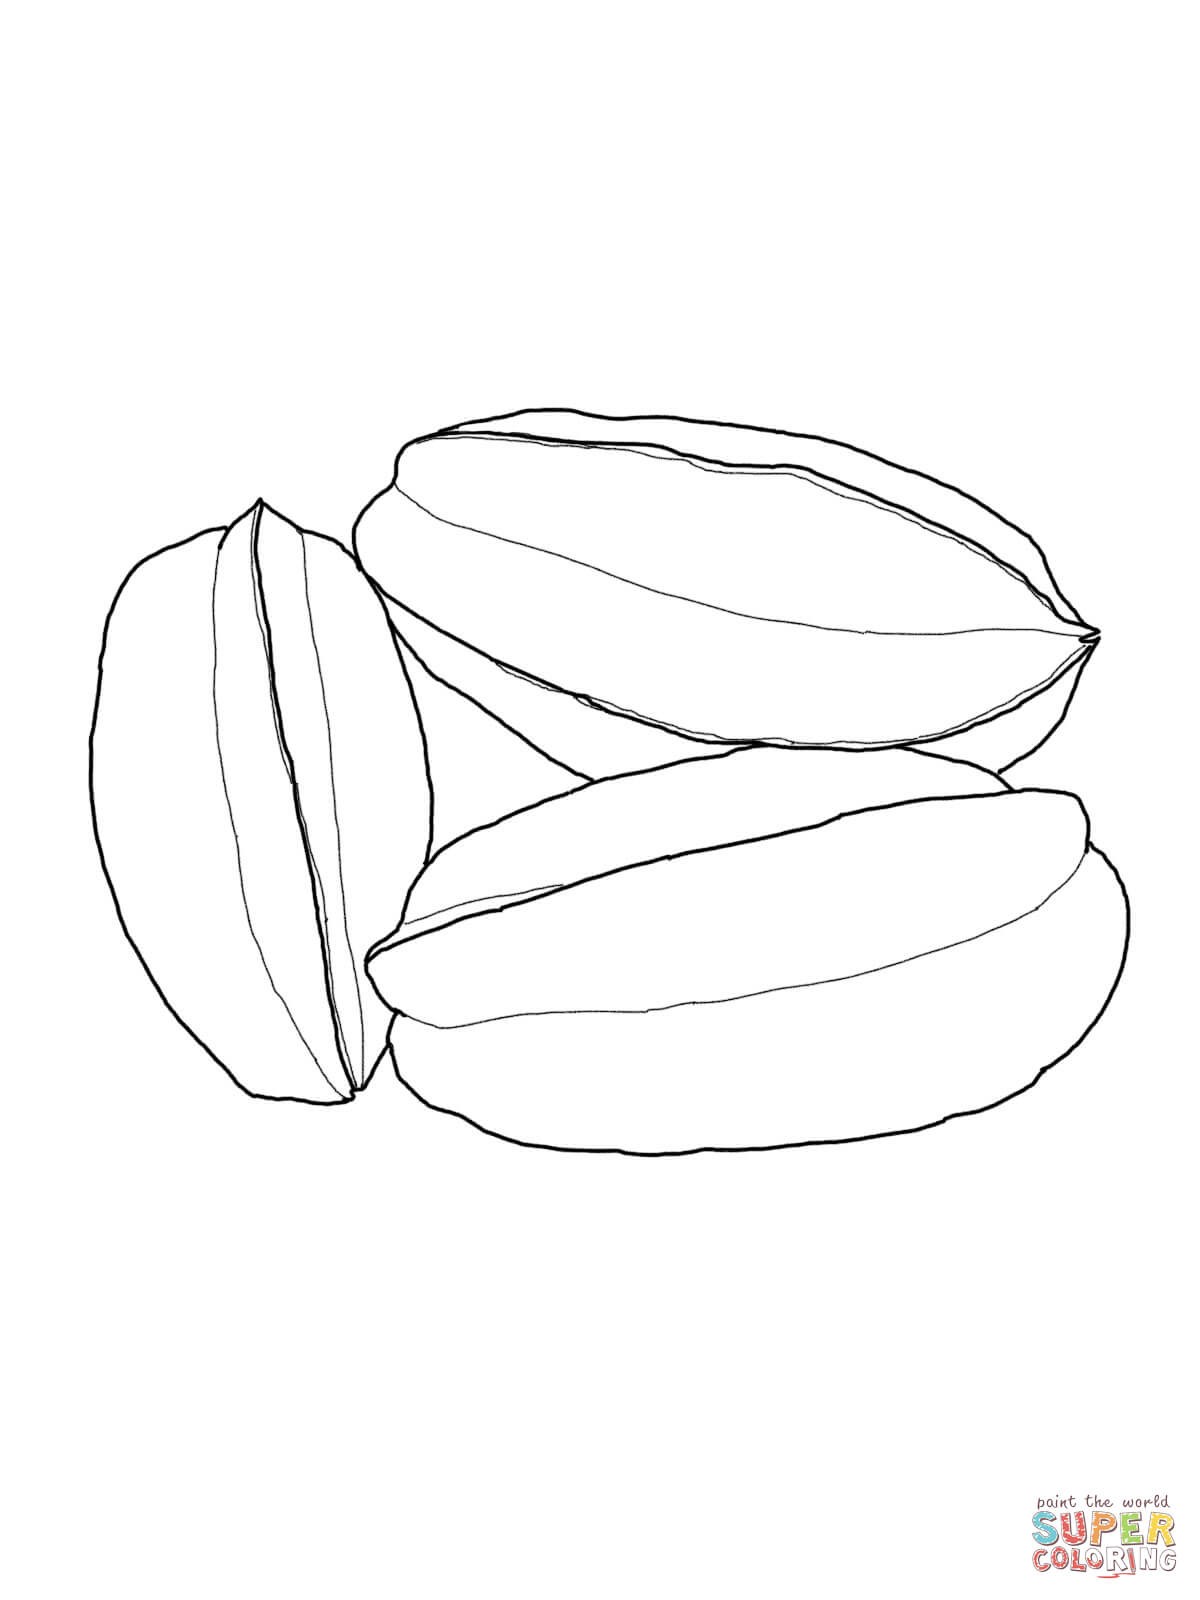 Cranberry Coloring Pages at GetColorings.com | Free printable colorings ...